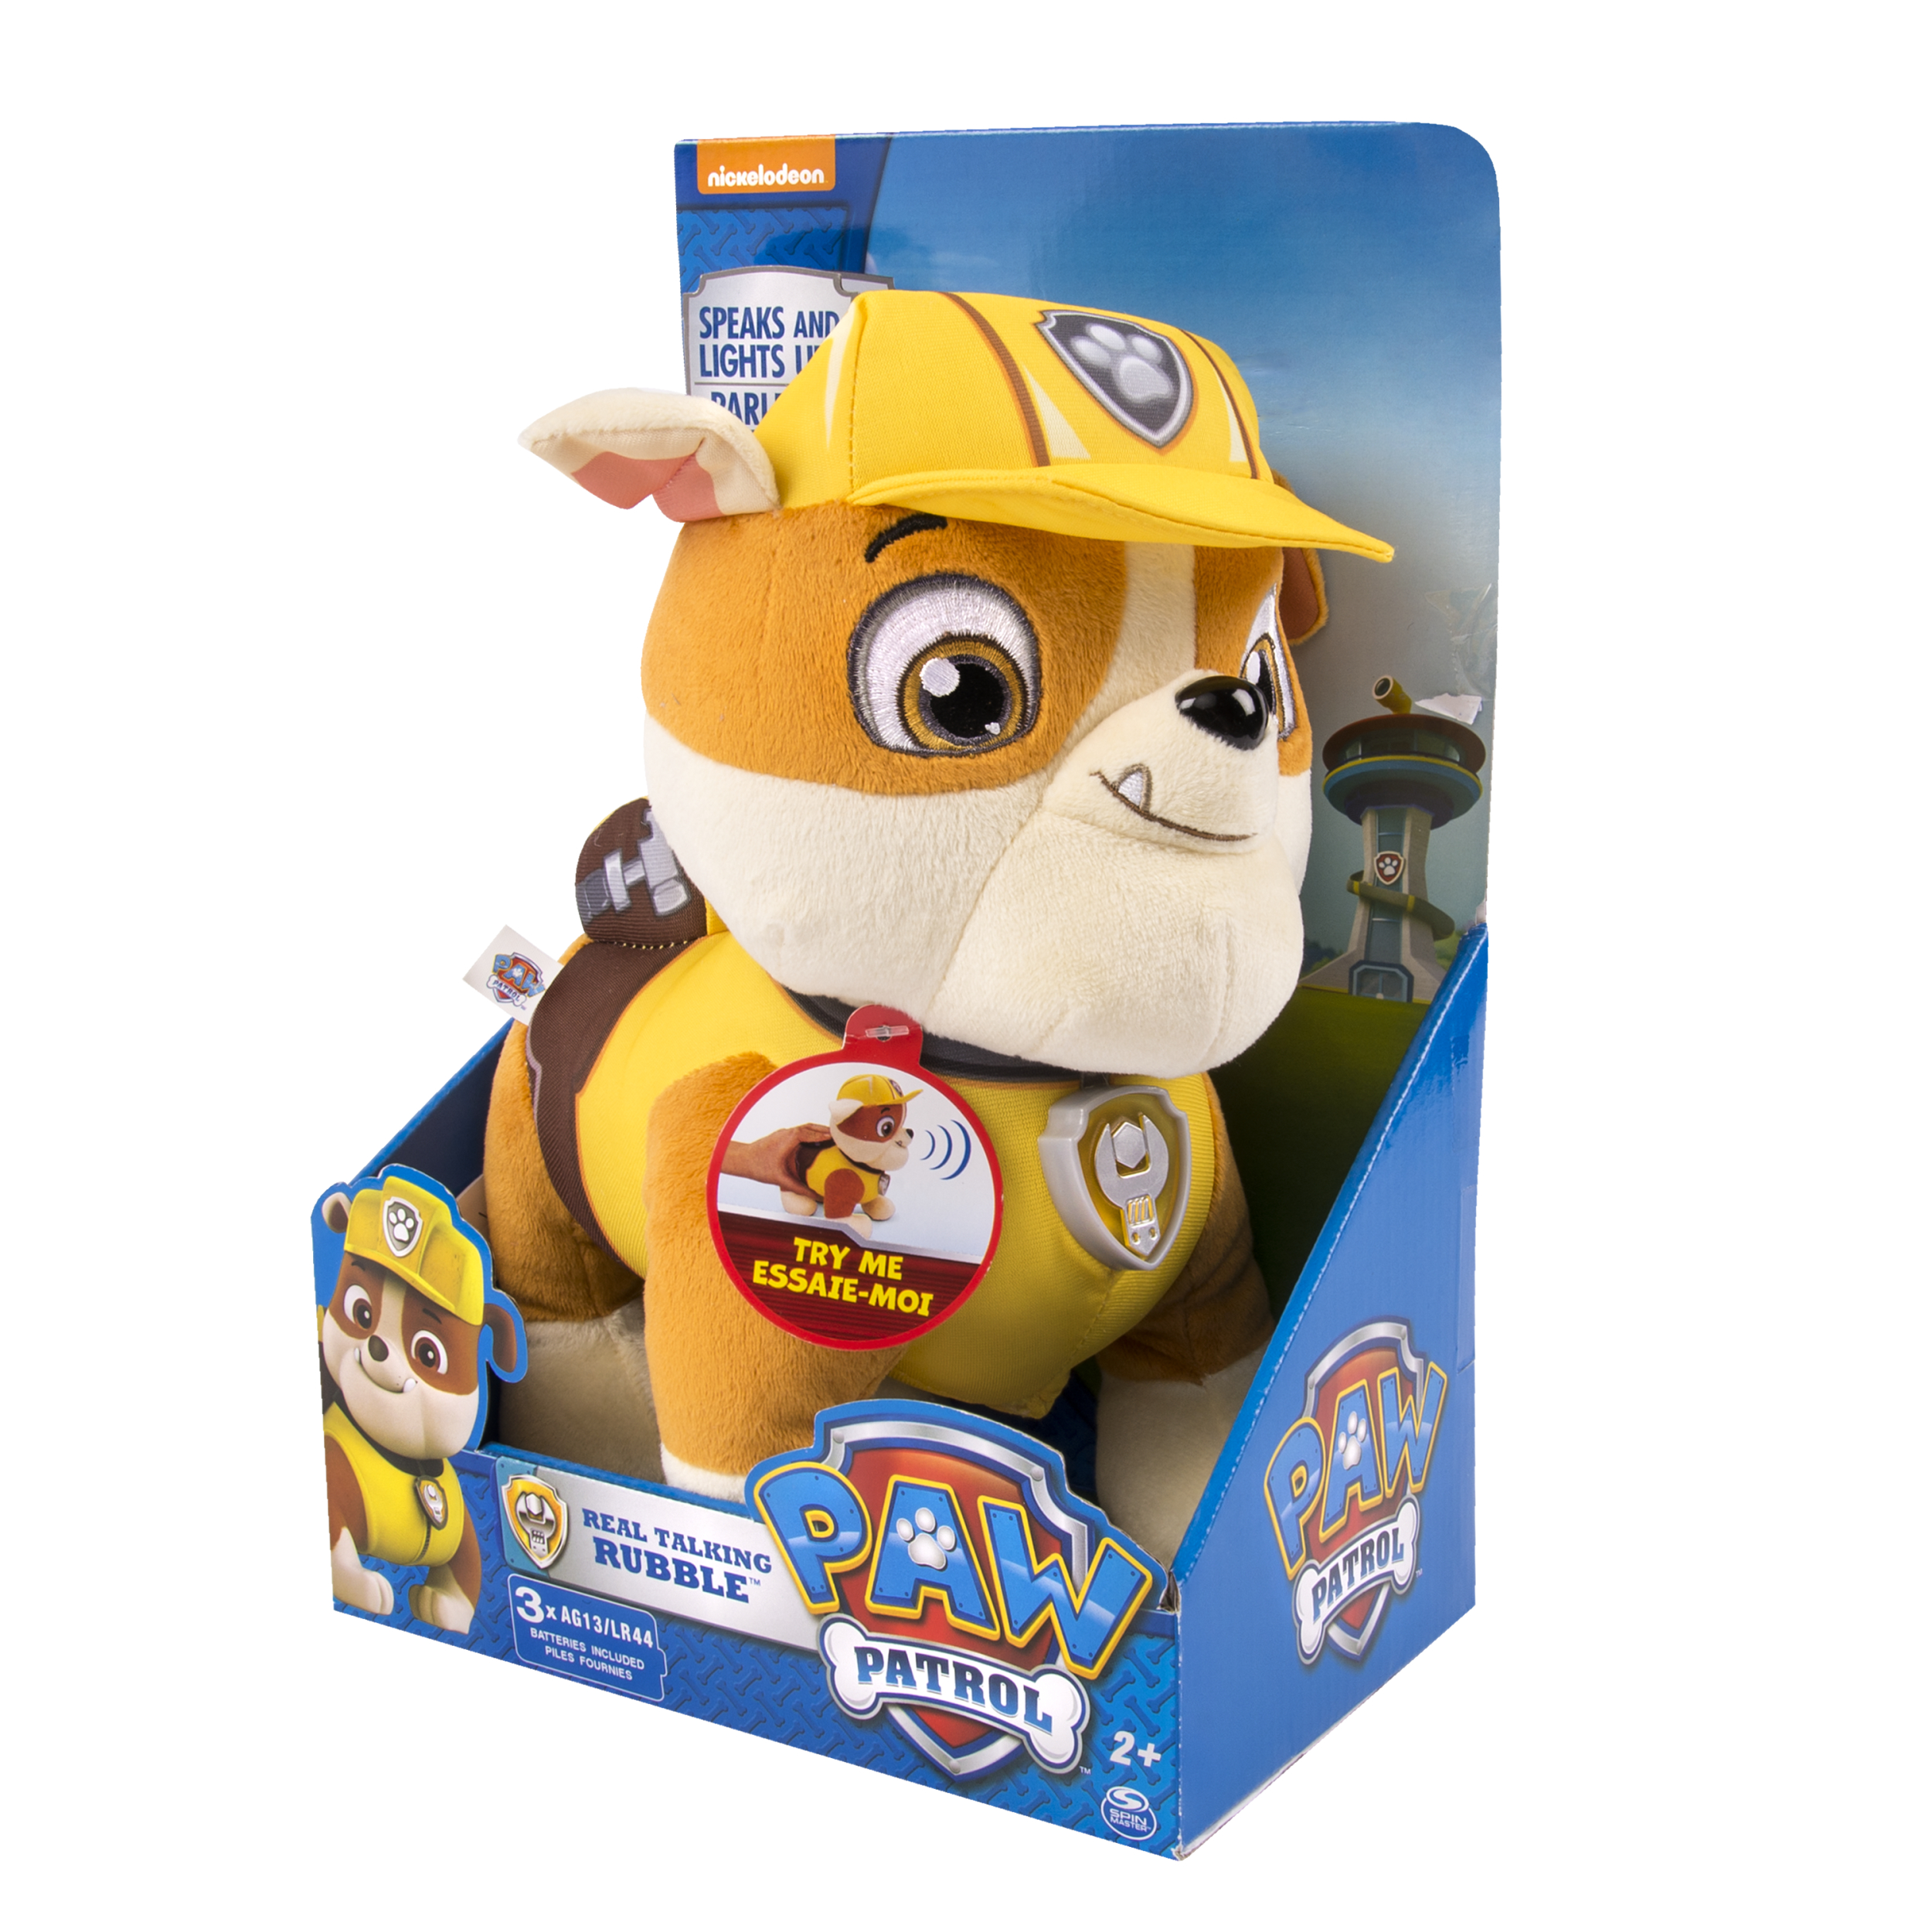 Paw Patrol Deluxe Lights and Sounds Plush, Real Talking Rubble - image 5 of 5